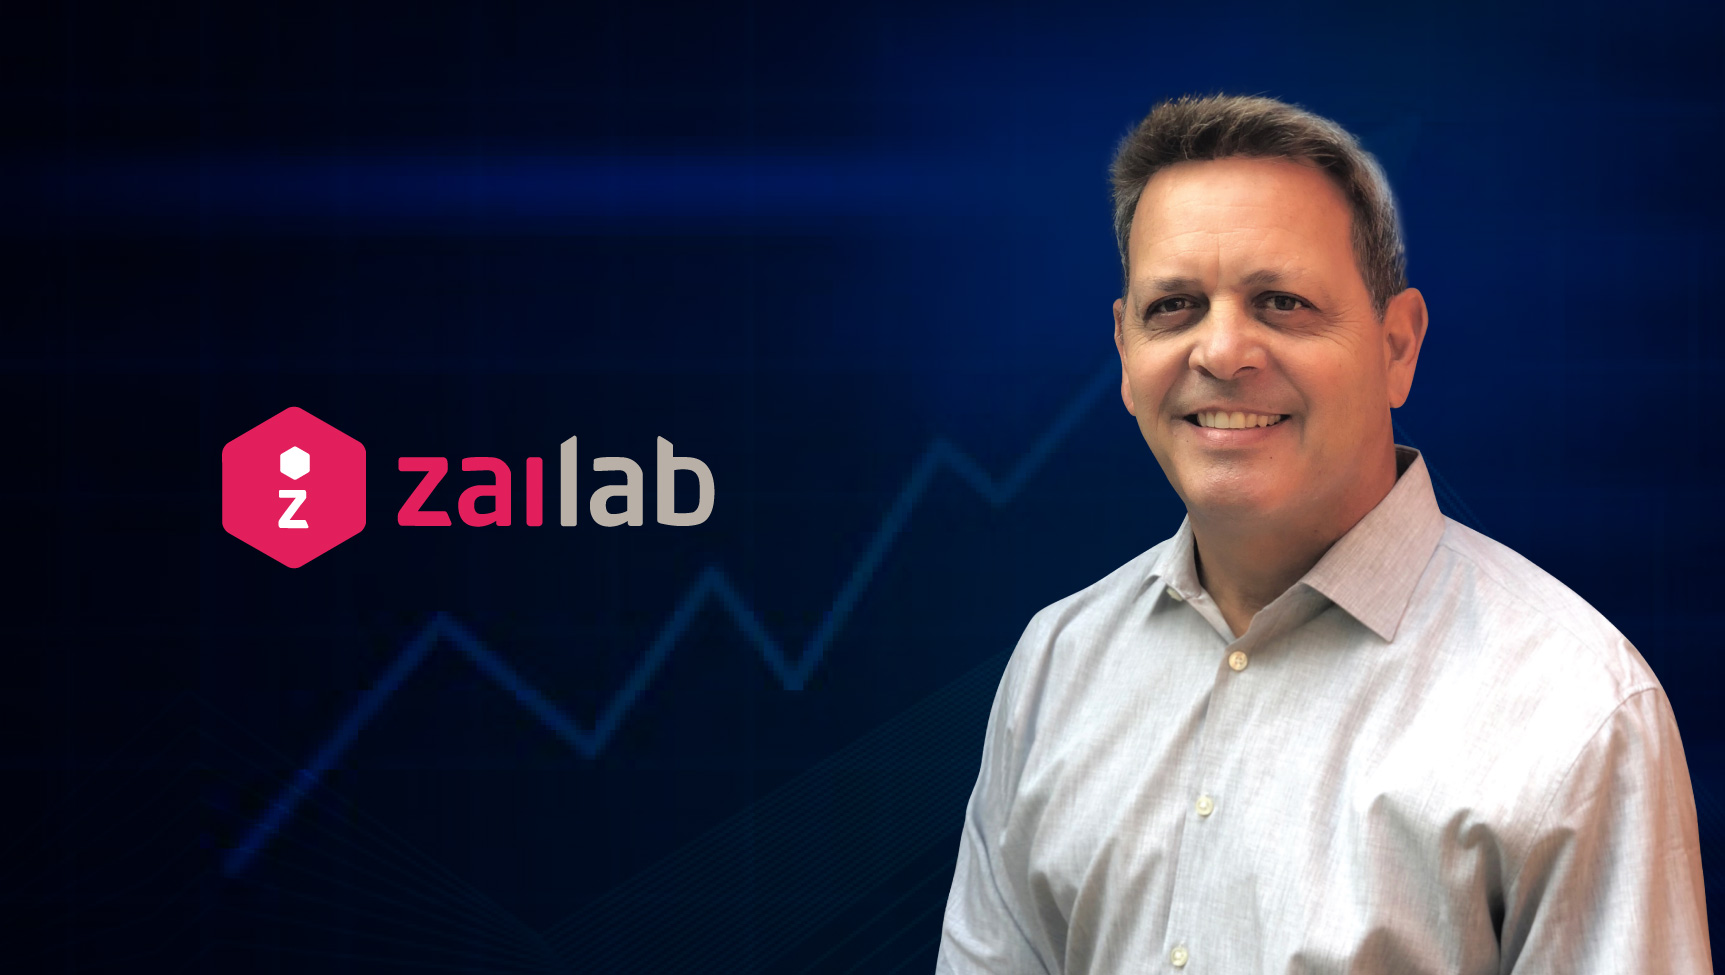 SalesTech Interview With Michael Cibelli, SVP of Sales at Zailab